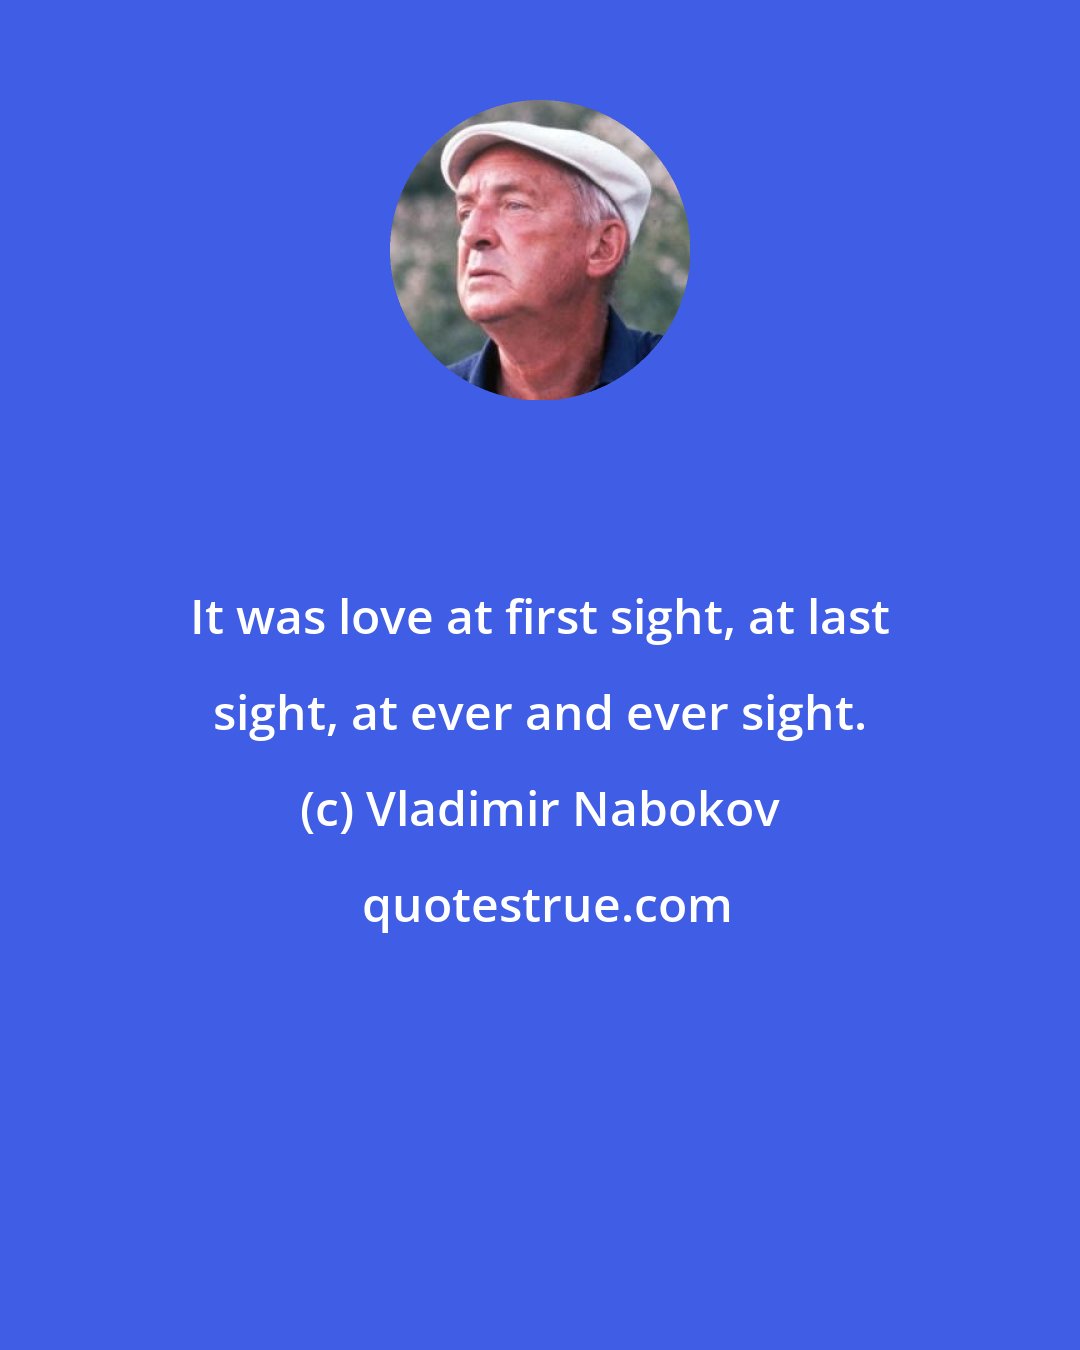 Vladimir Nabokov: It was love at first sight, at last sight, at ever and ever sight.